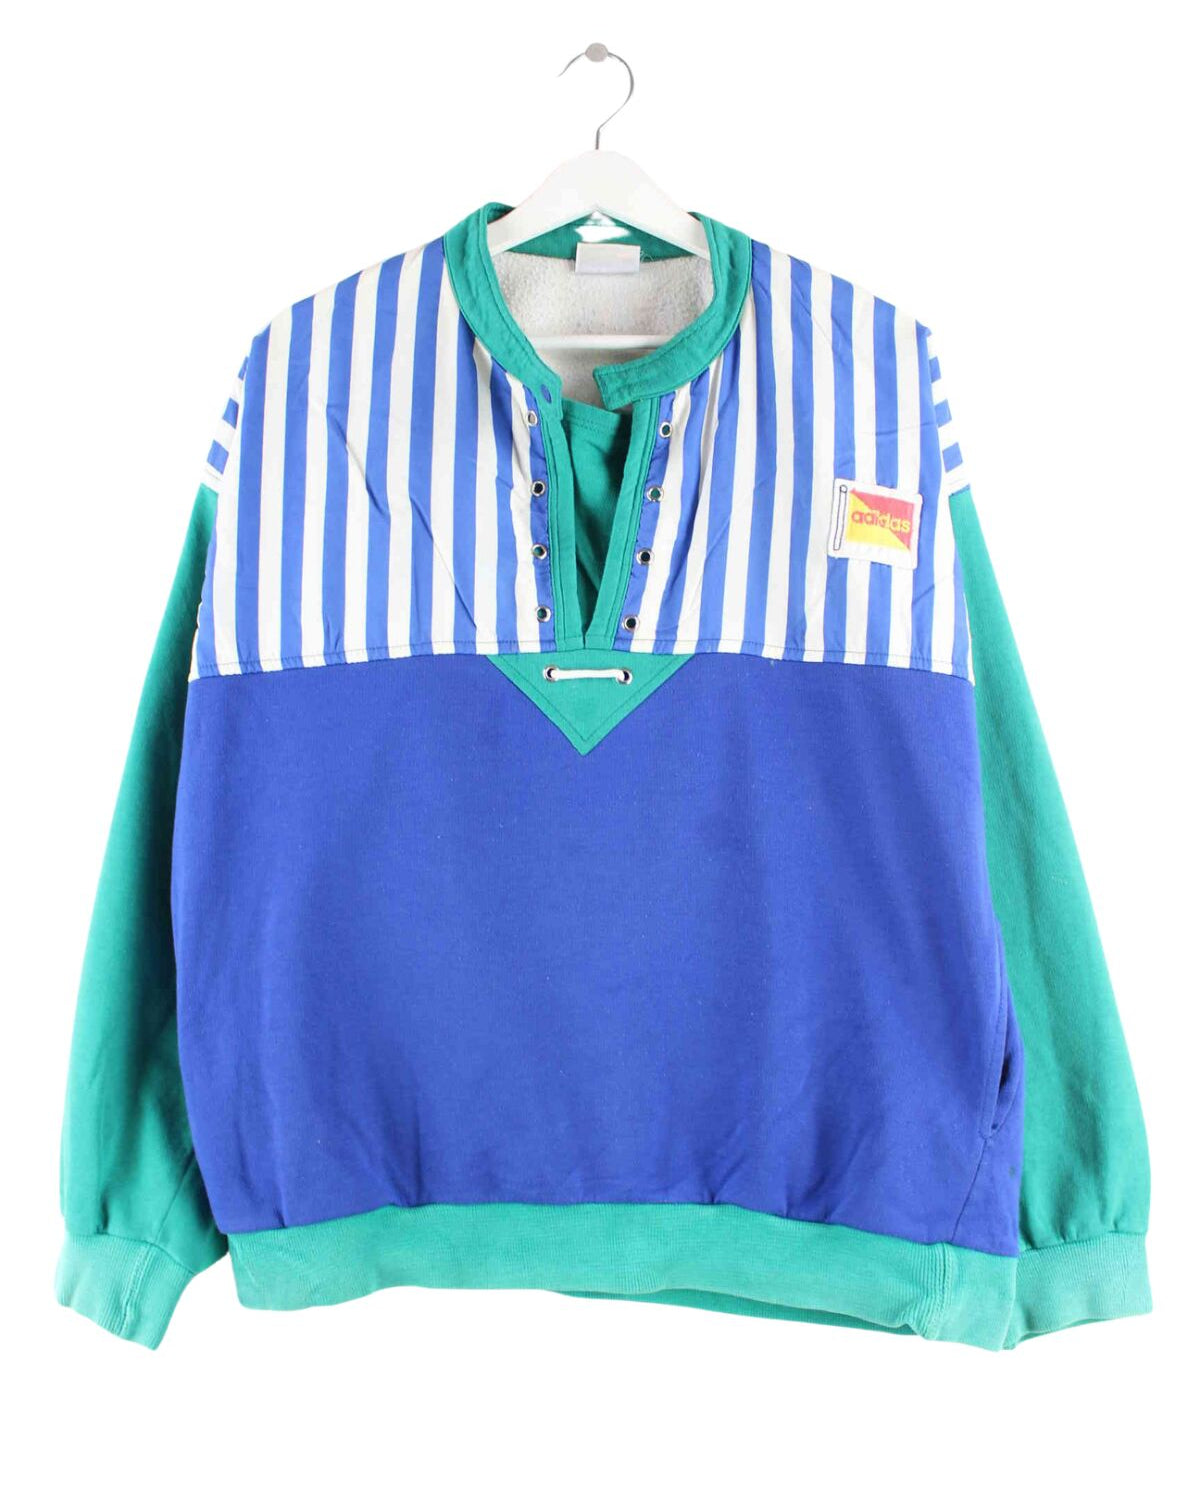 Adidas 70s Vintage Embroidered Sweater Blau L (front image)